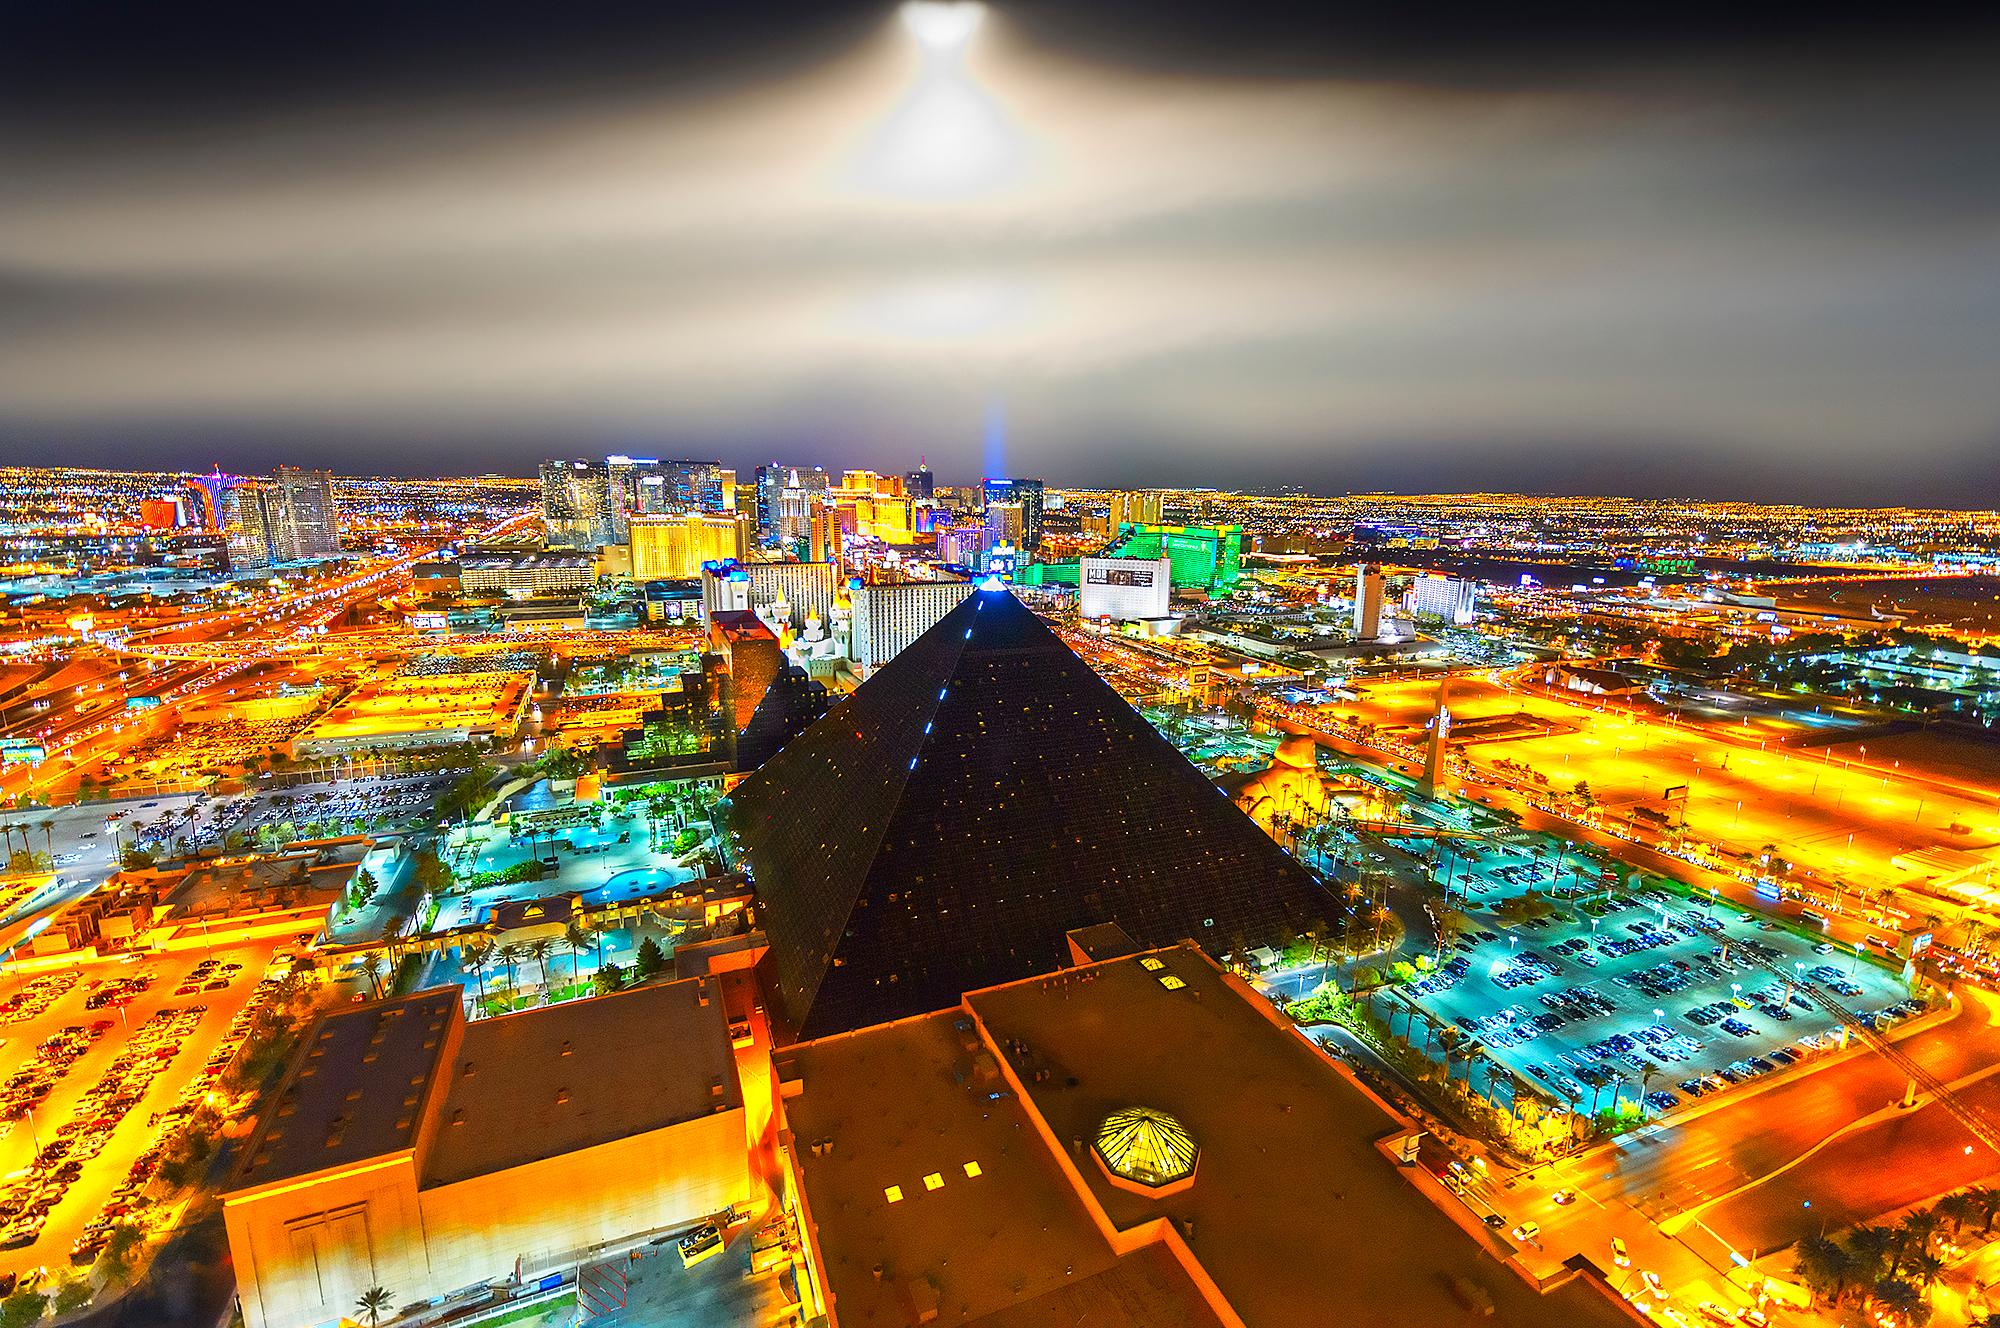 Elevated View Of Las Vegas At Night With Moonlit Sky